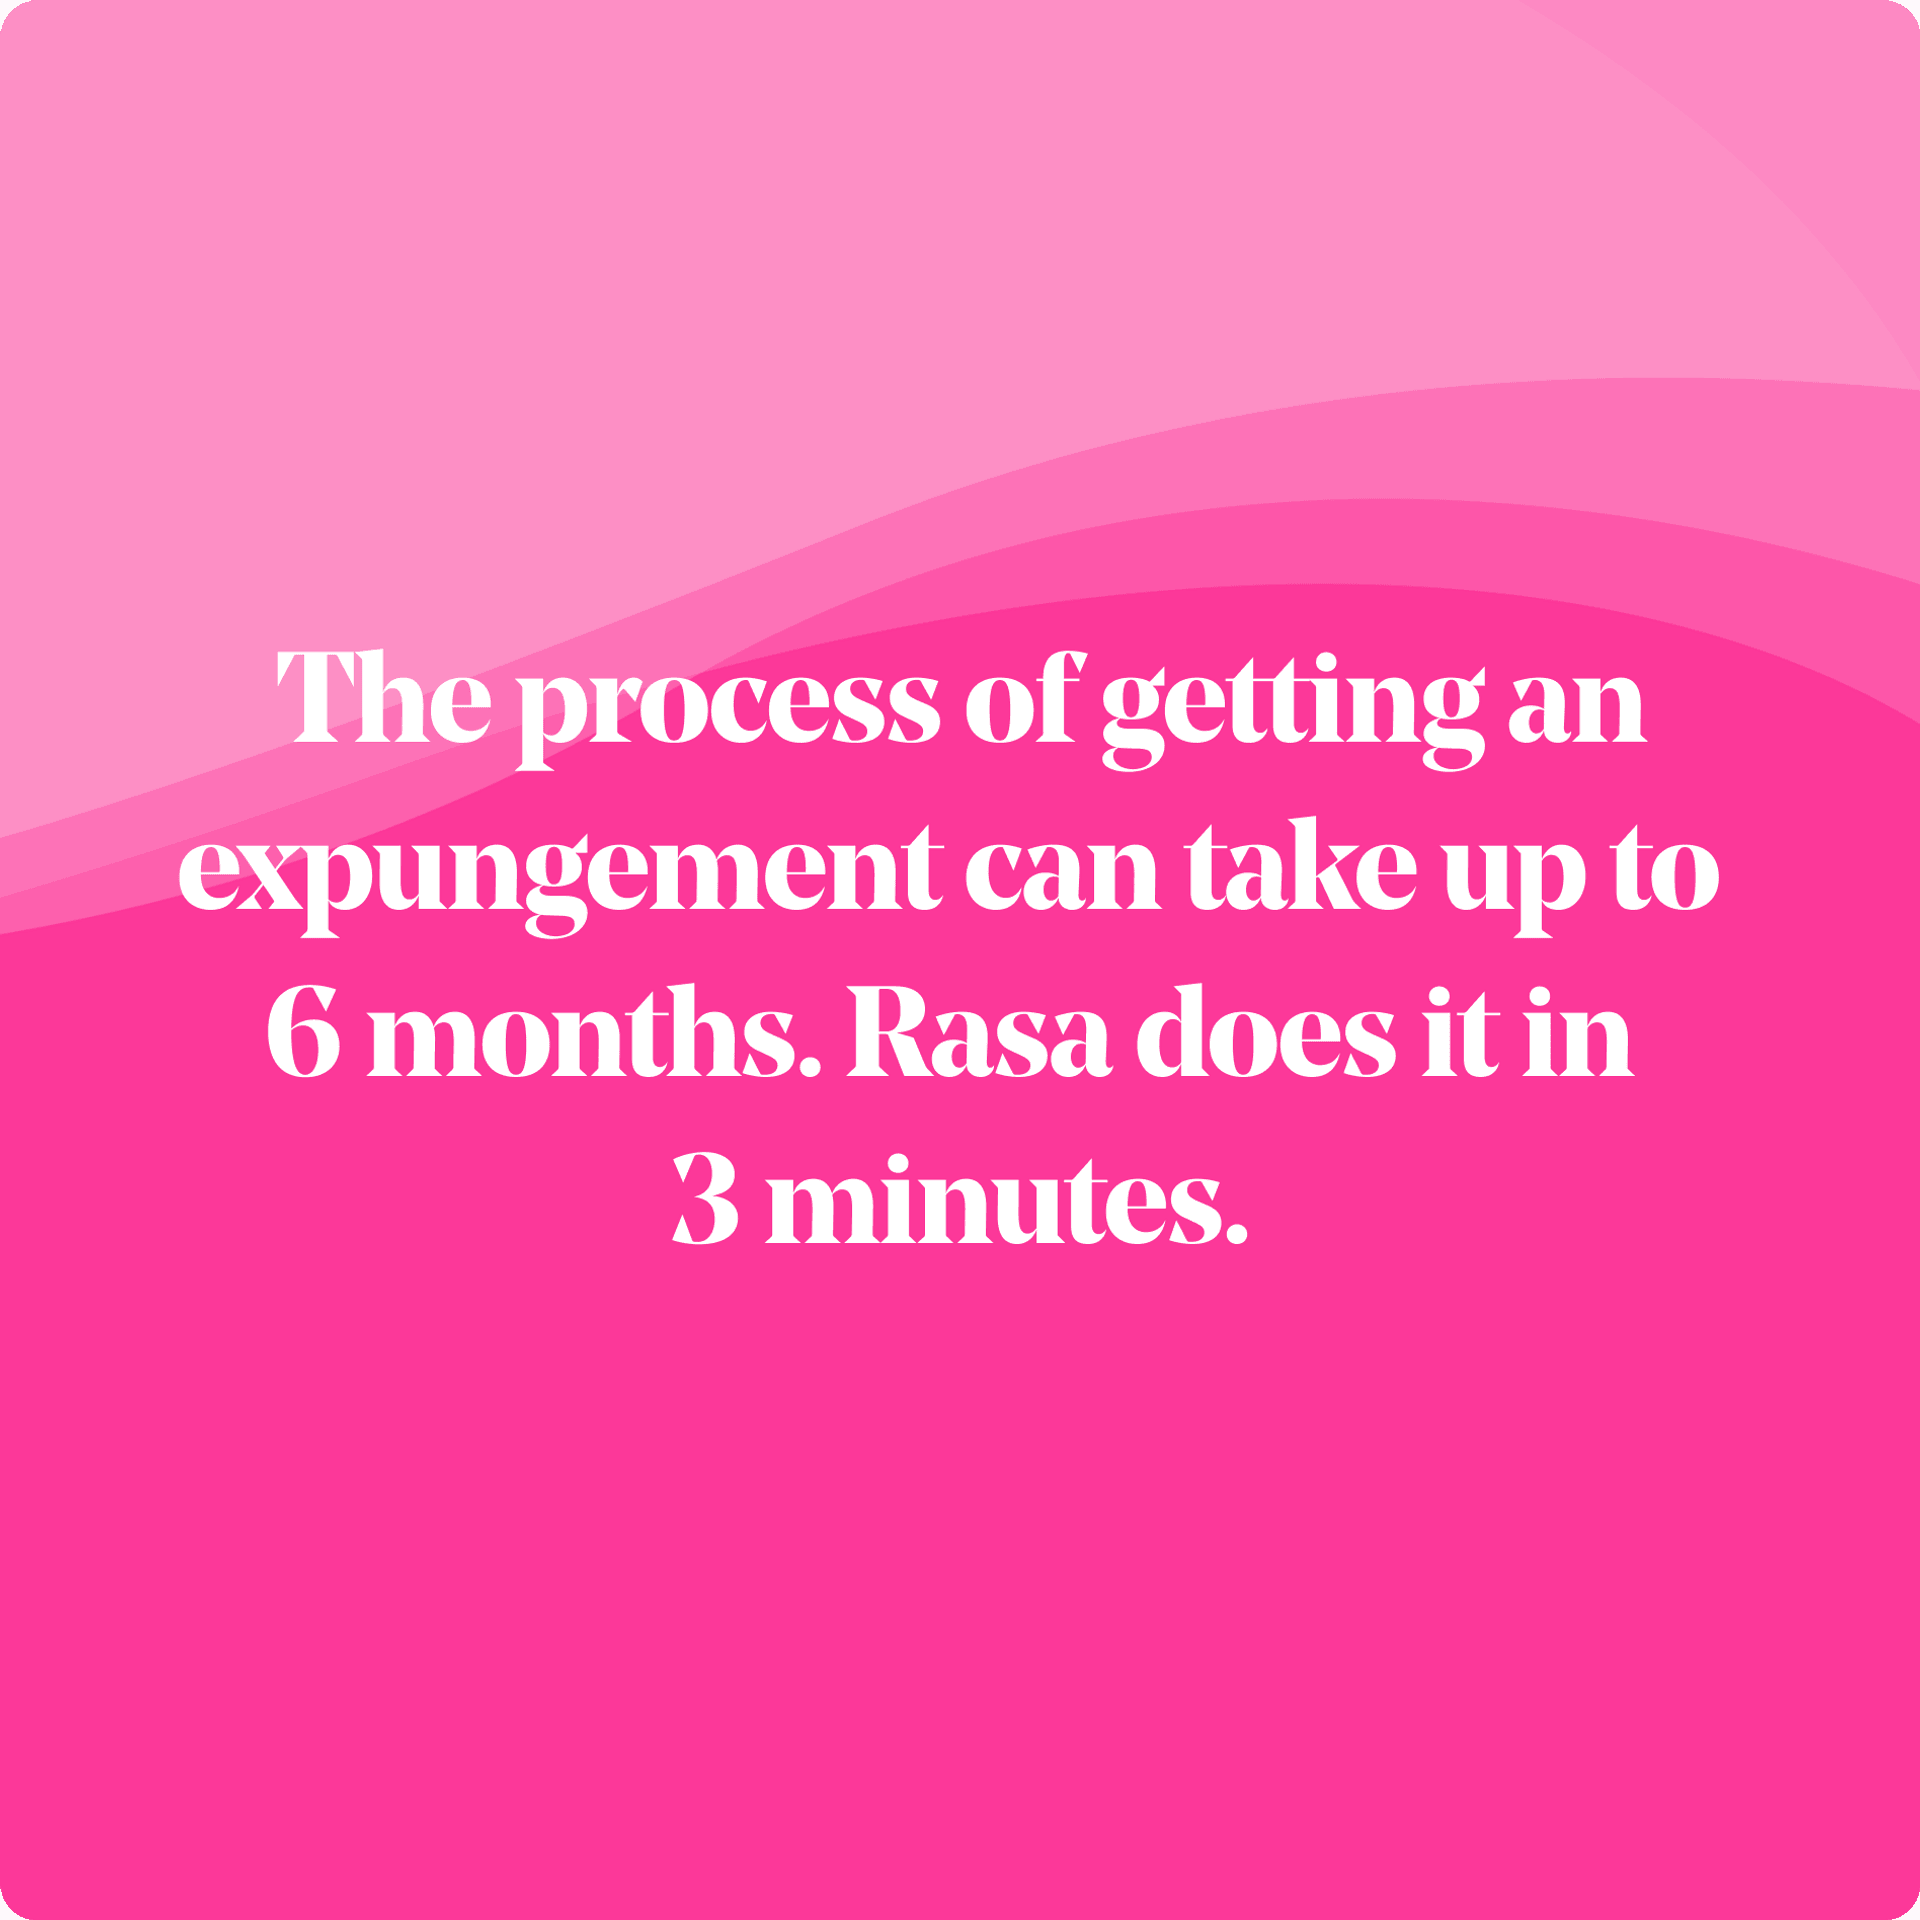 The process of getting an expungement can take up to 6 months. Rasa does it in 3 minutes.